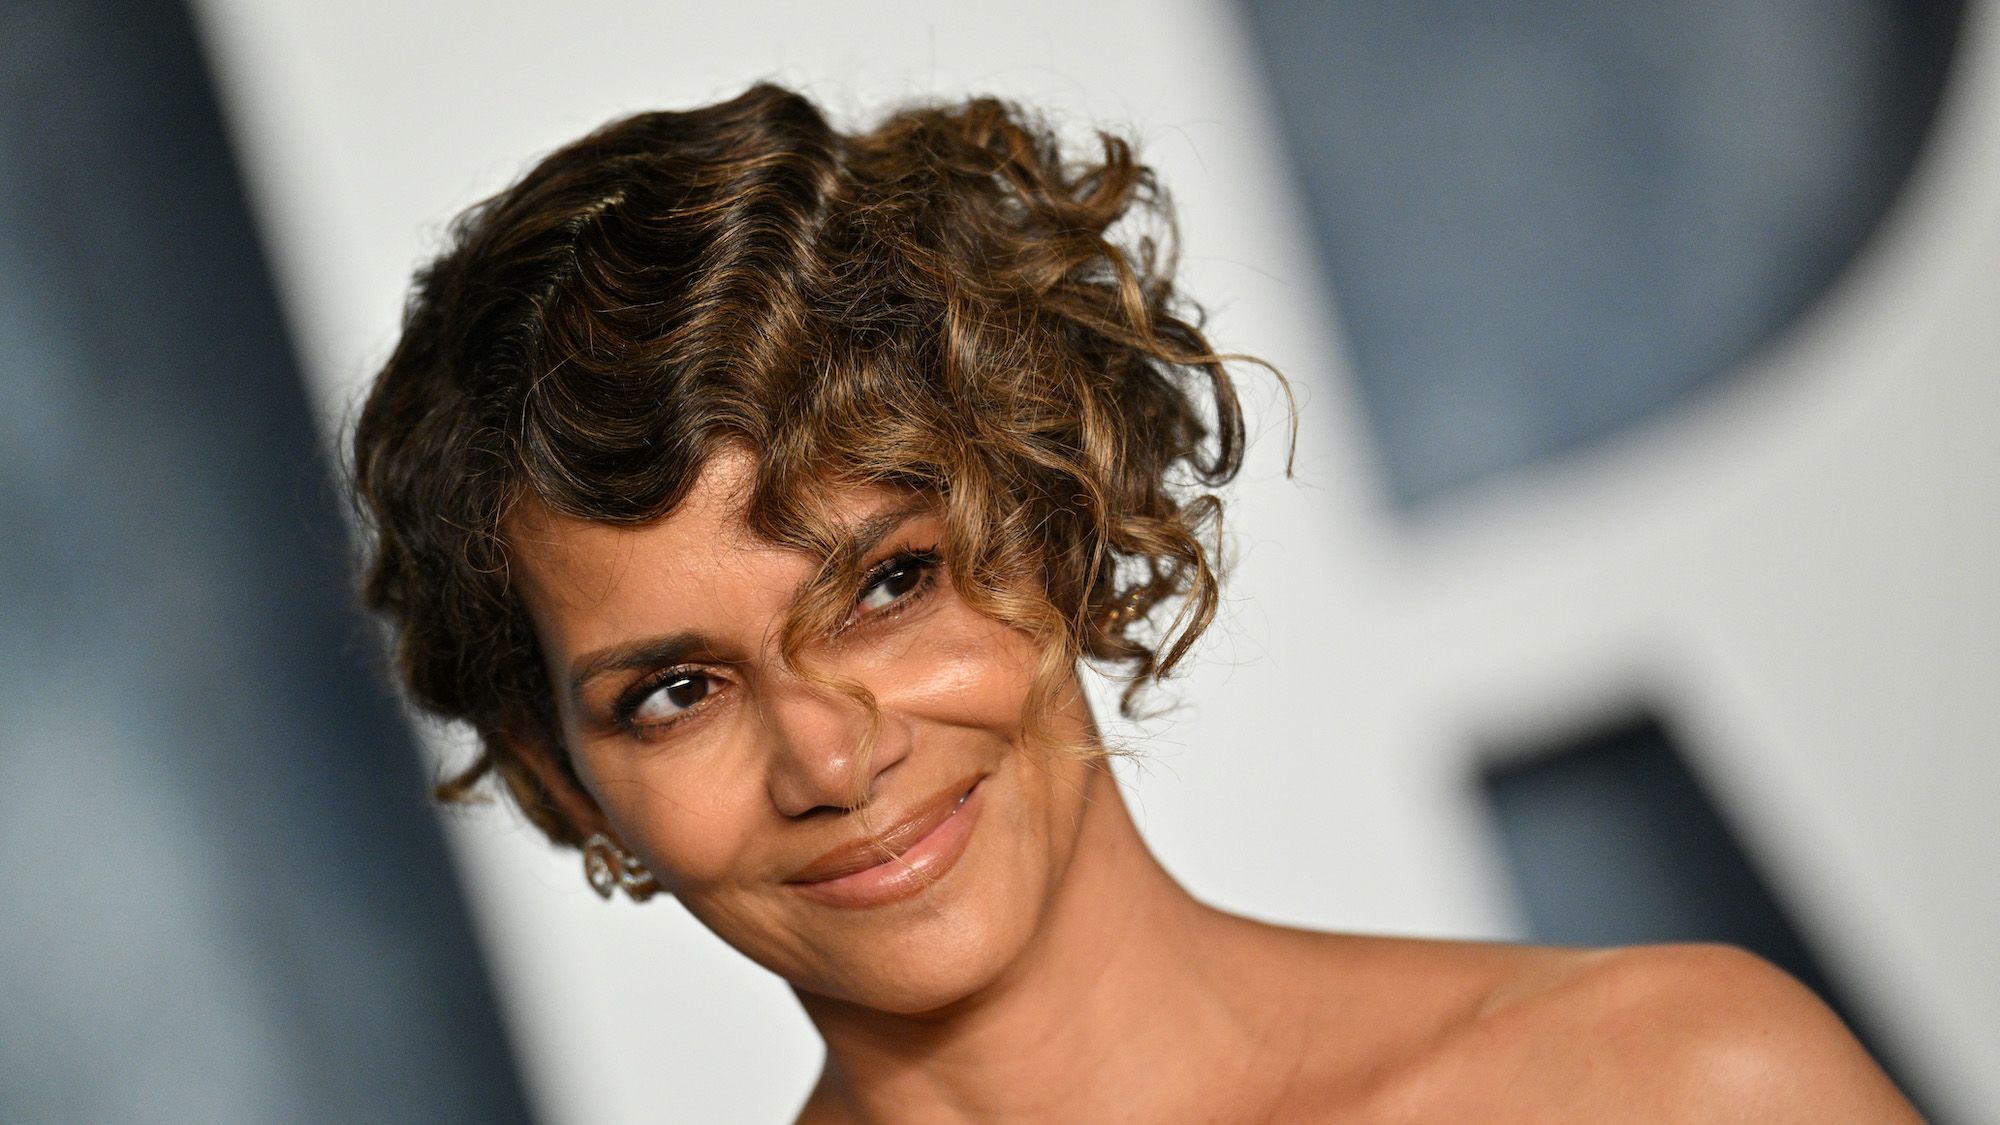 Holly Near Tits - Halle Berry Poses Nude While Drinking Wine on Her Balcony In New Pic